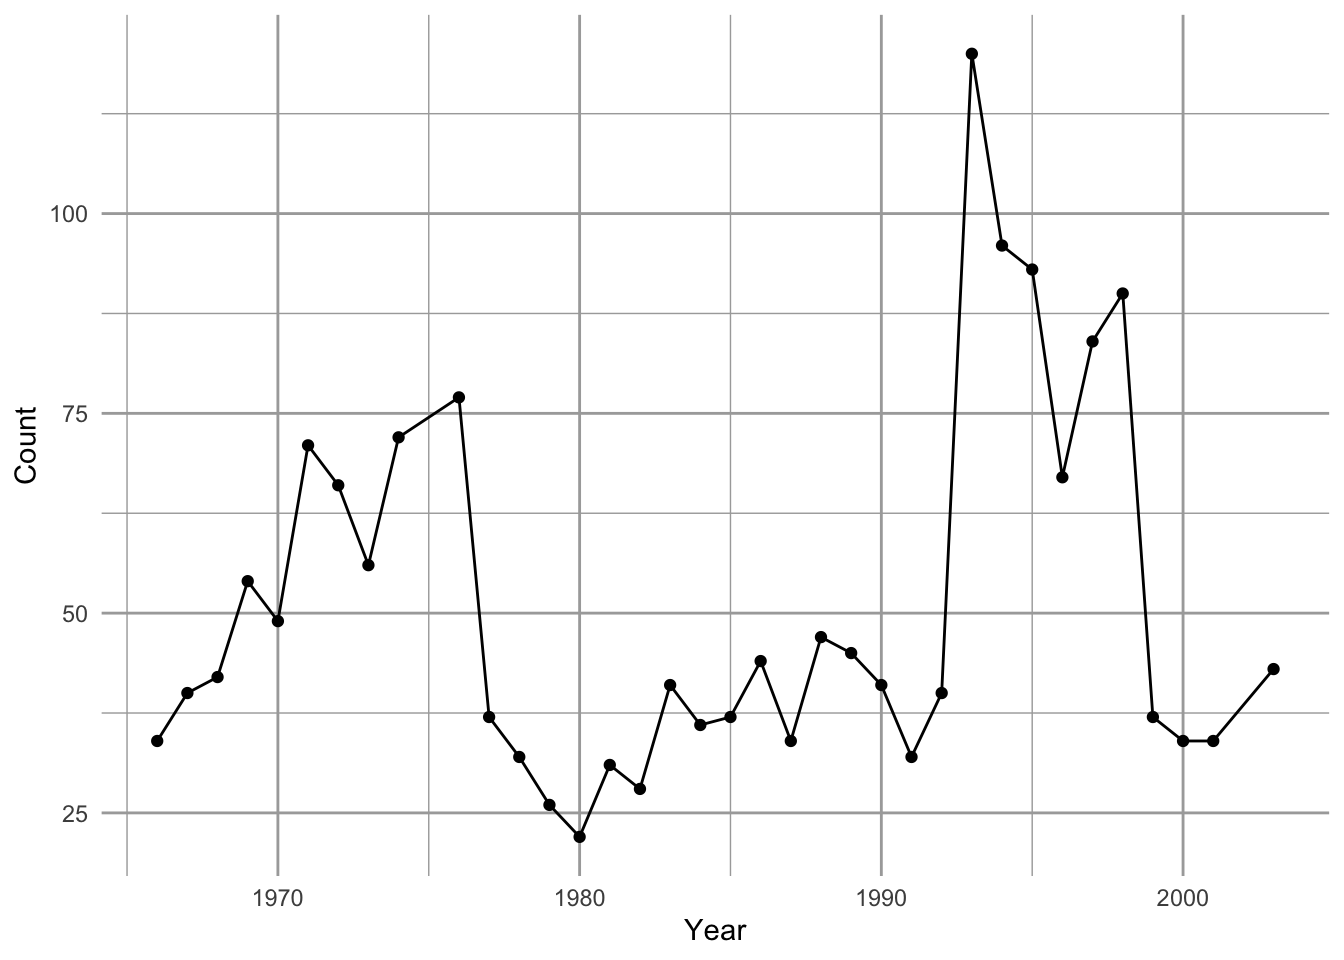 Song Sparrow *Melospiza melodia* counts, $N$, from 1966--2003 and the relation between observed counts ($N_t$) and annual growth rate ($r_t = N_{t+1}/N_t - 1$) determined from those counts, fit with ordinary least squares regression. See Chapter 3 for data source.